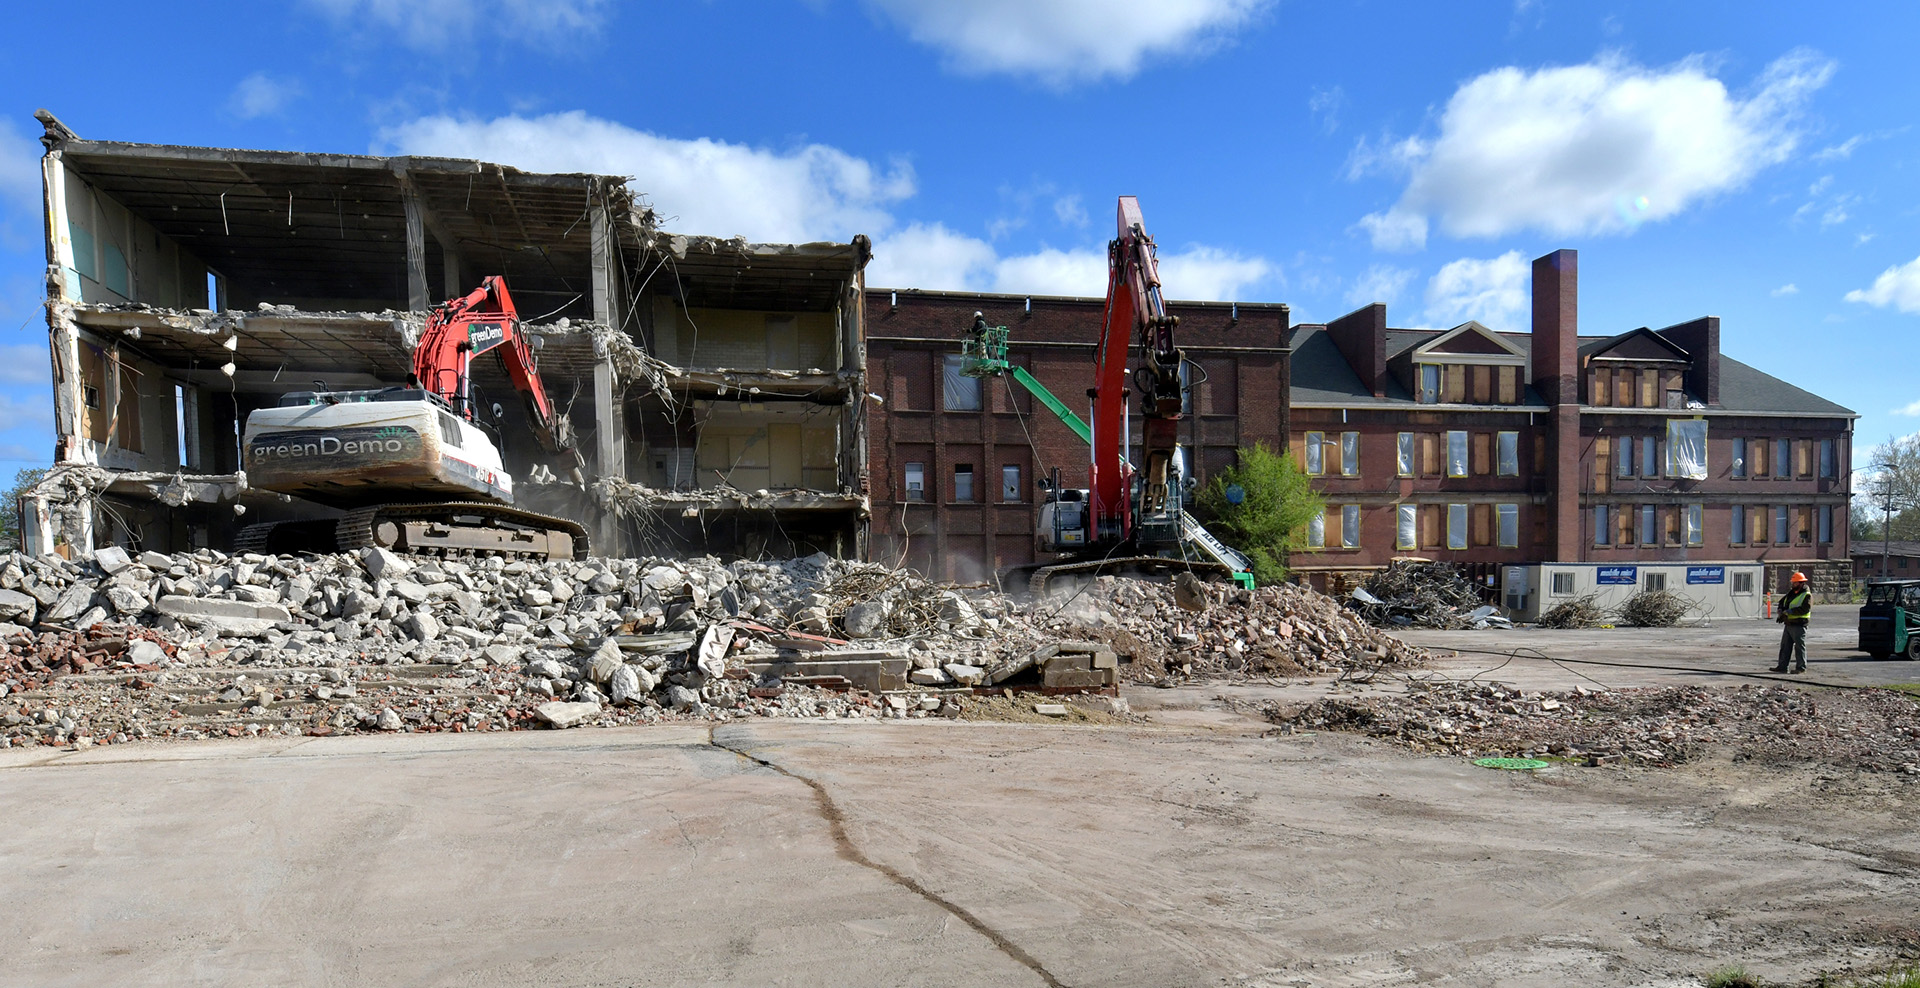 The original Harrison school, built in 1901, comes down after serving countless students over more than a century